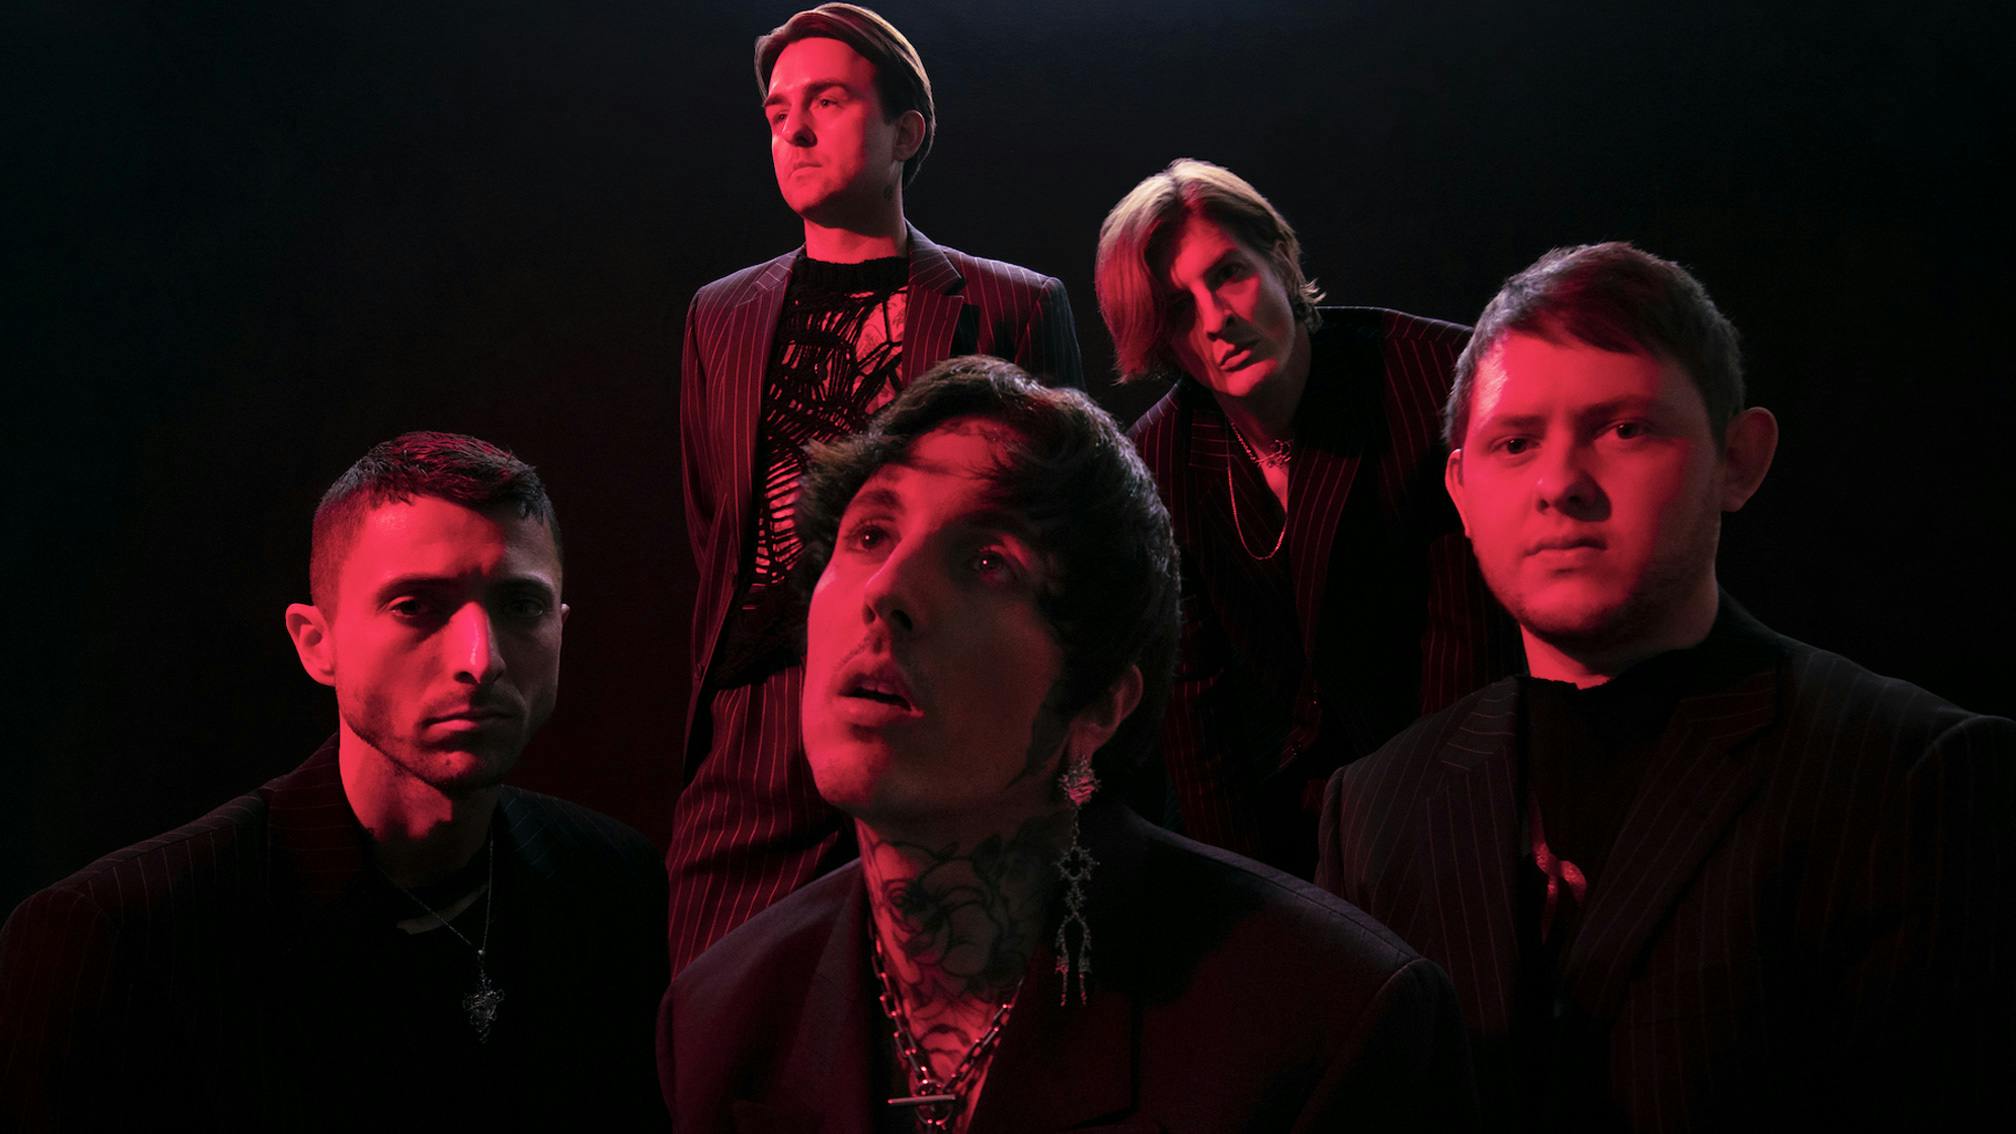 Bring Me The Horizon announce U.S. tour with Knocked Loose, grandson, Siiickbrain